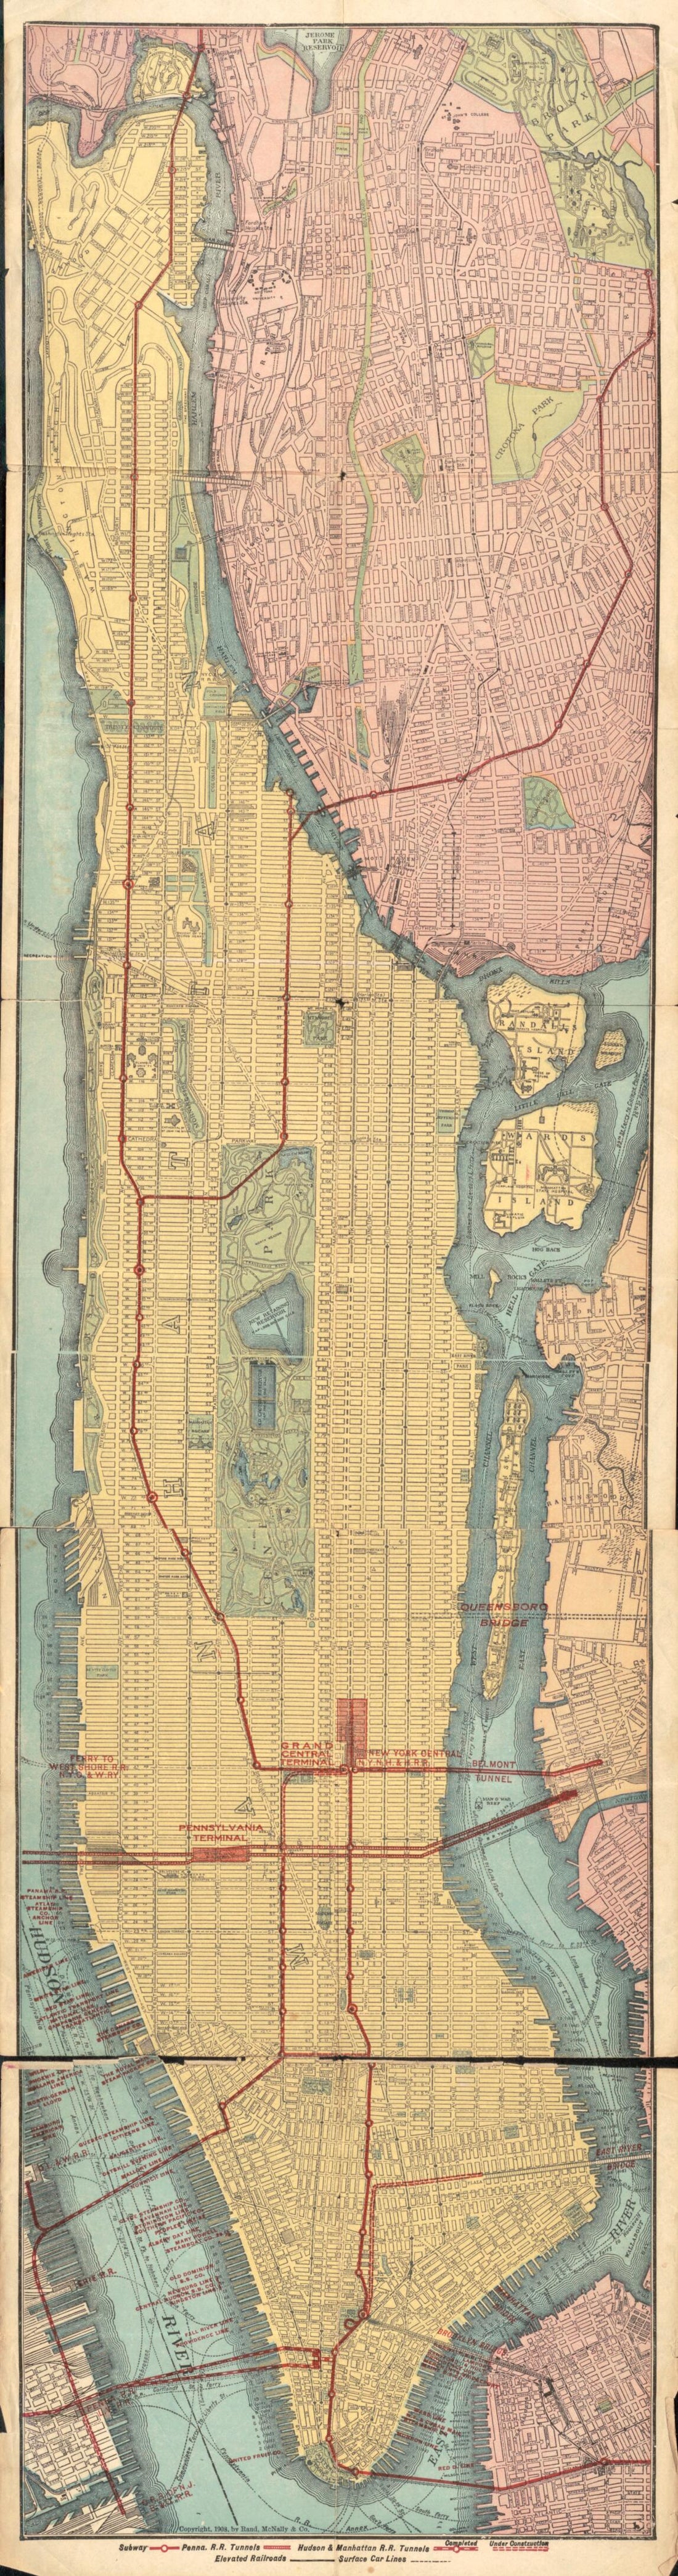 This old map of Rapid Transit Map of Manhattan and Adjacent Districts of New York City from 1908 was created by  Rand McNally and Company in 1908